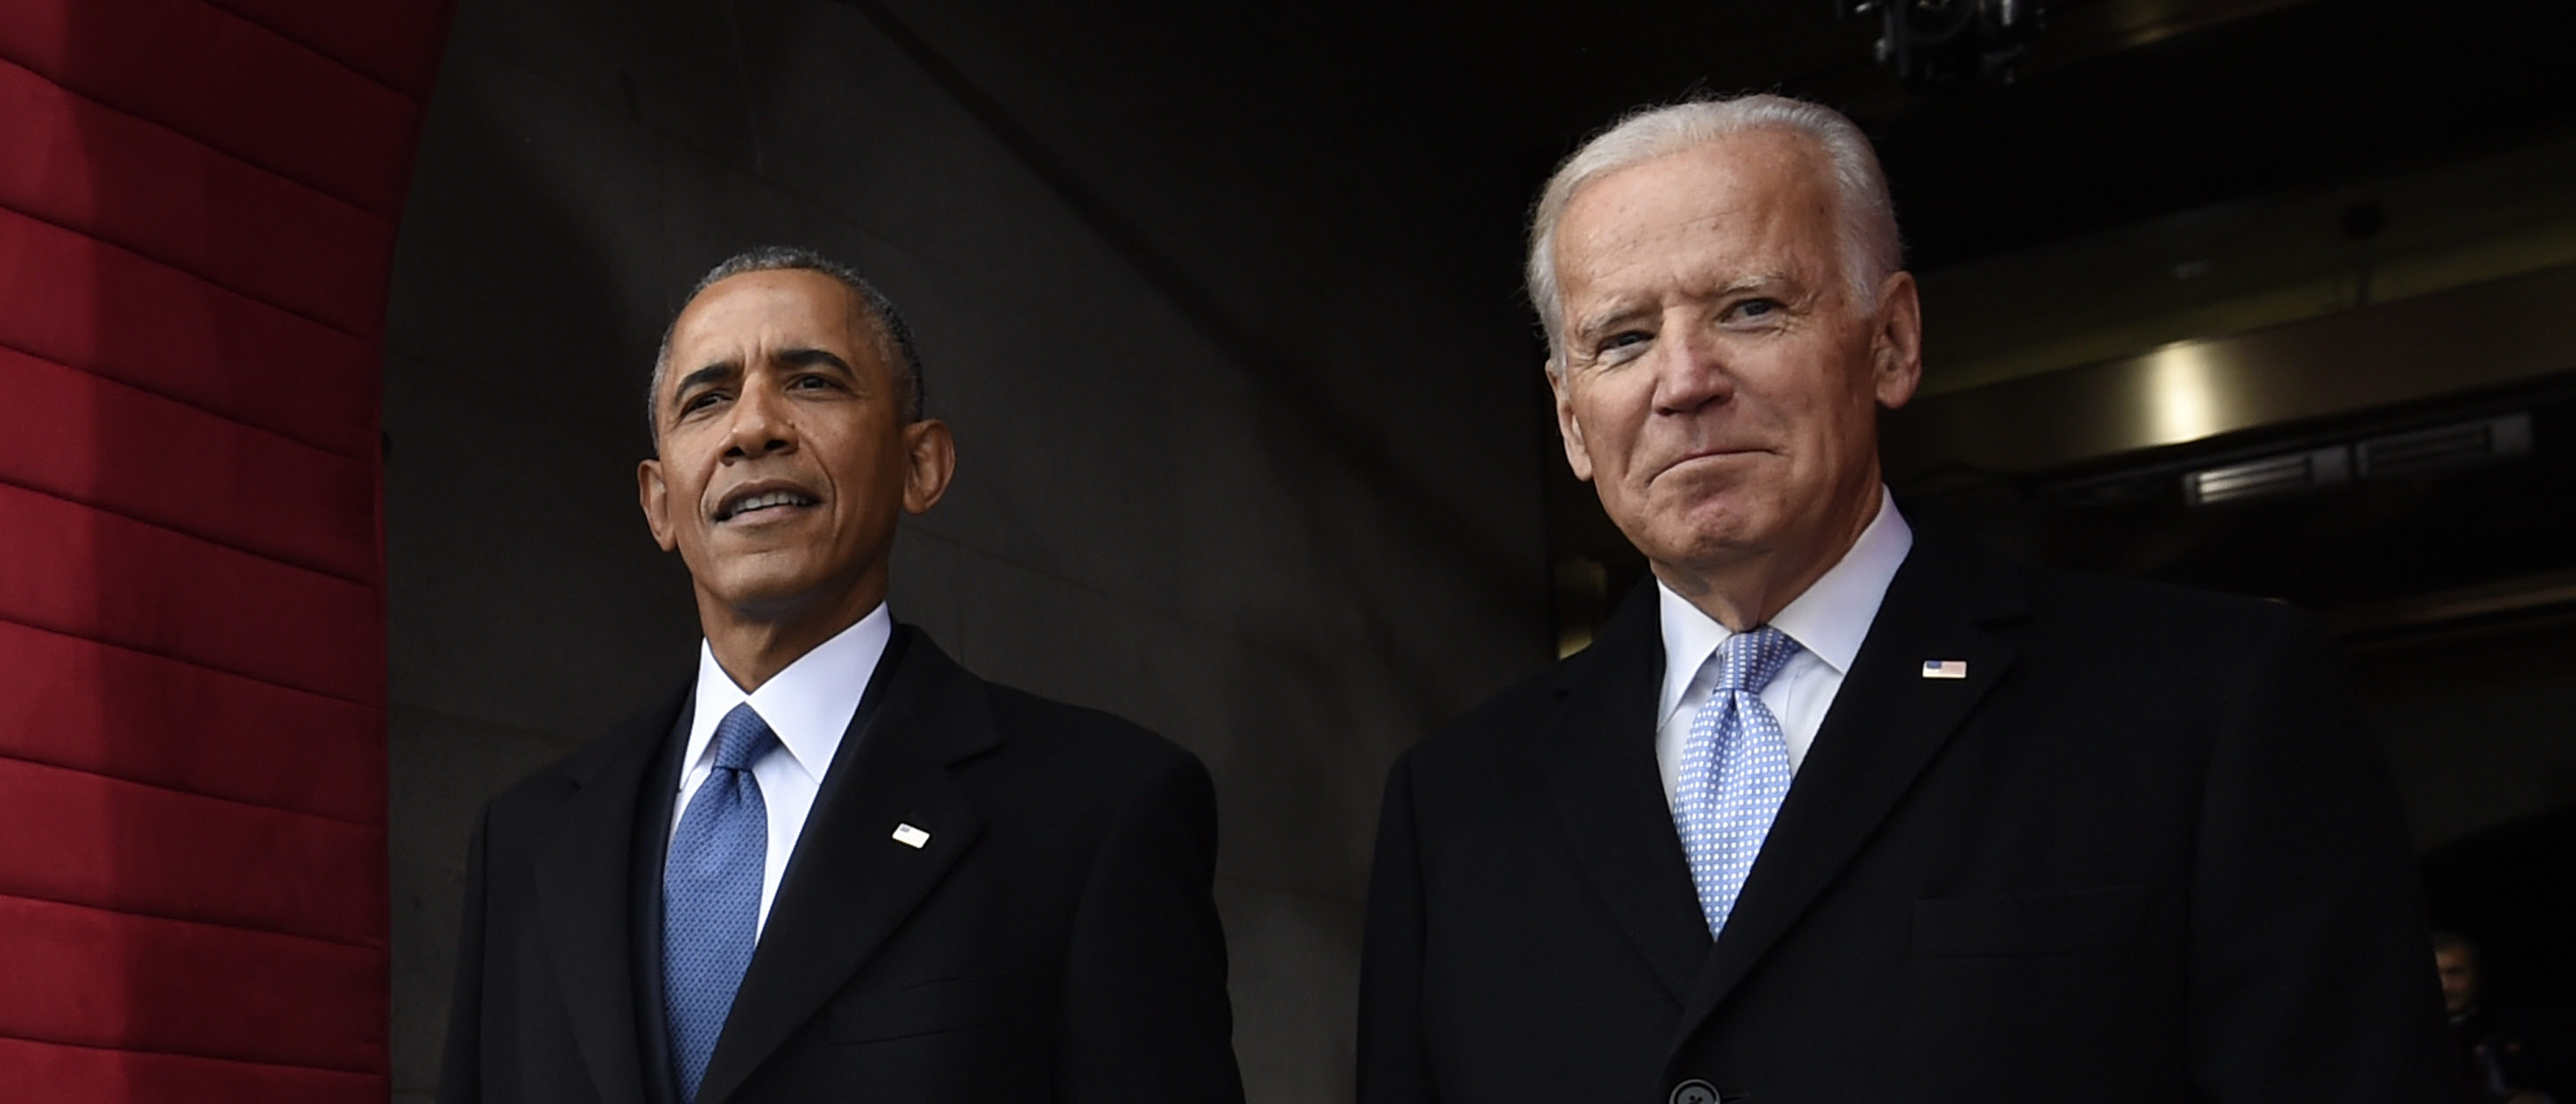 US President Barack Obama and Vice President Joe Biden arrive for the Presidential Inauguration of Donald Trump at the US Capitol on January 20, 2017 in Washington, DC. (Saul Loeb - Pool/Getty Images)